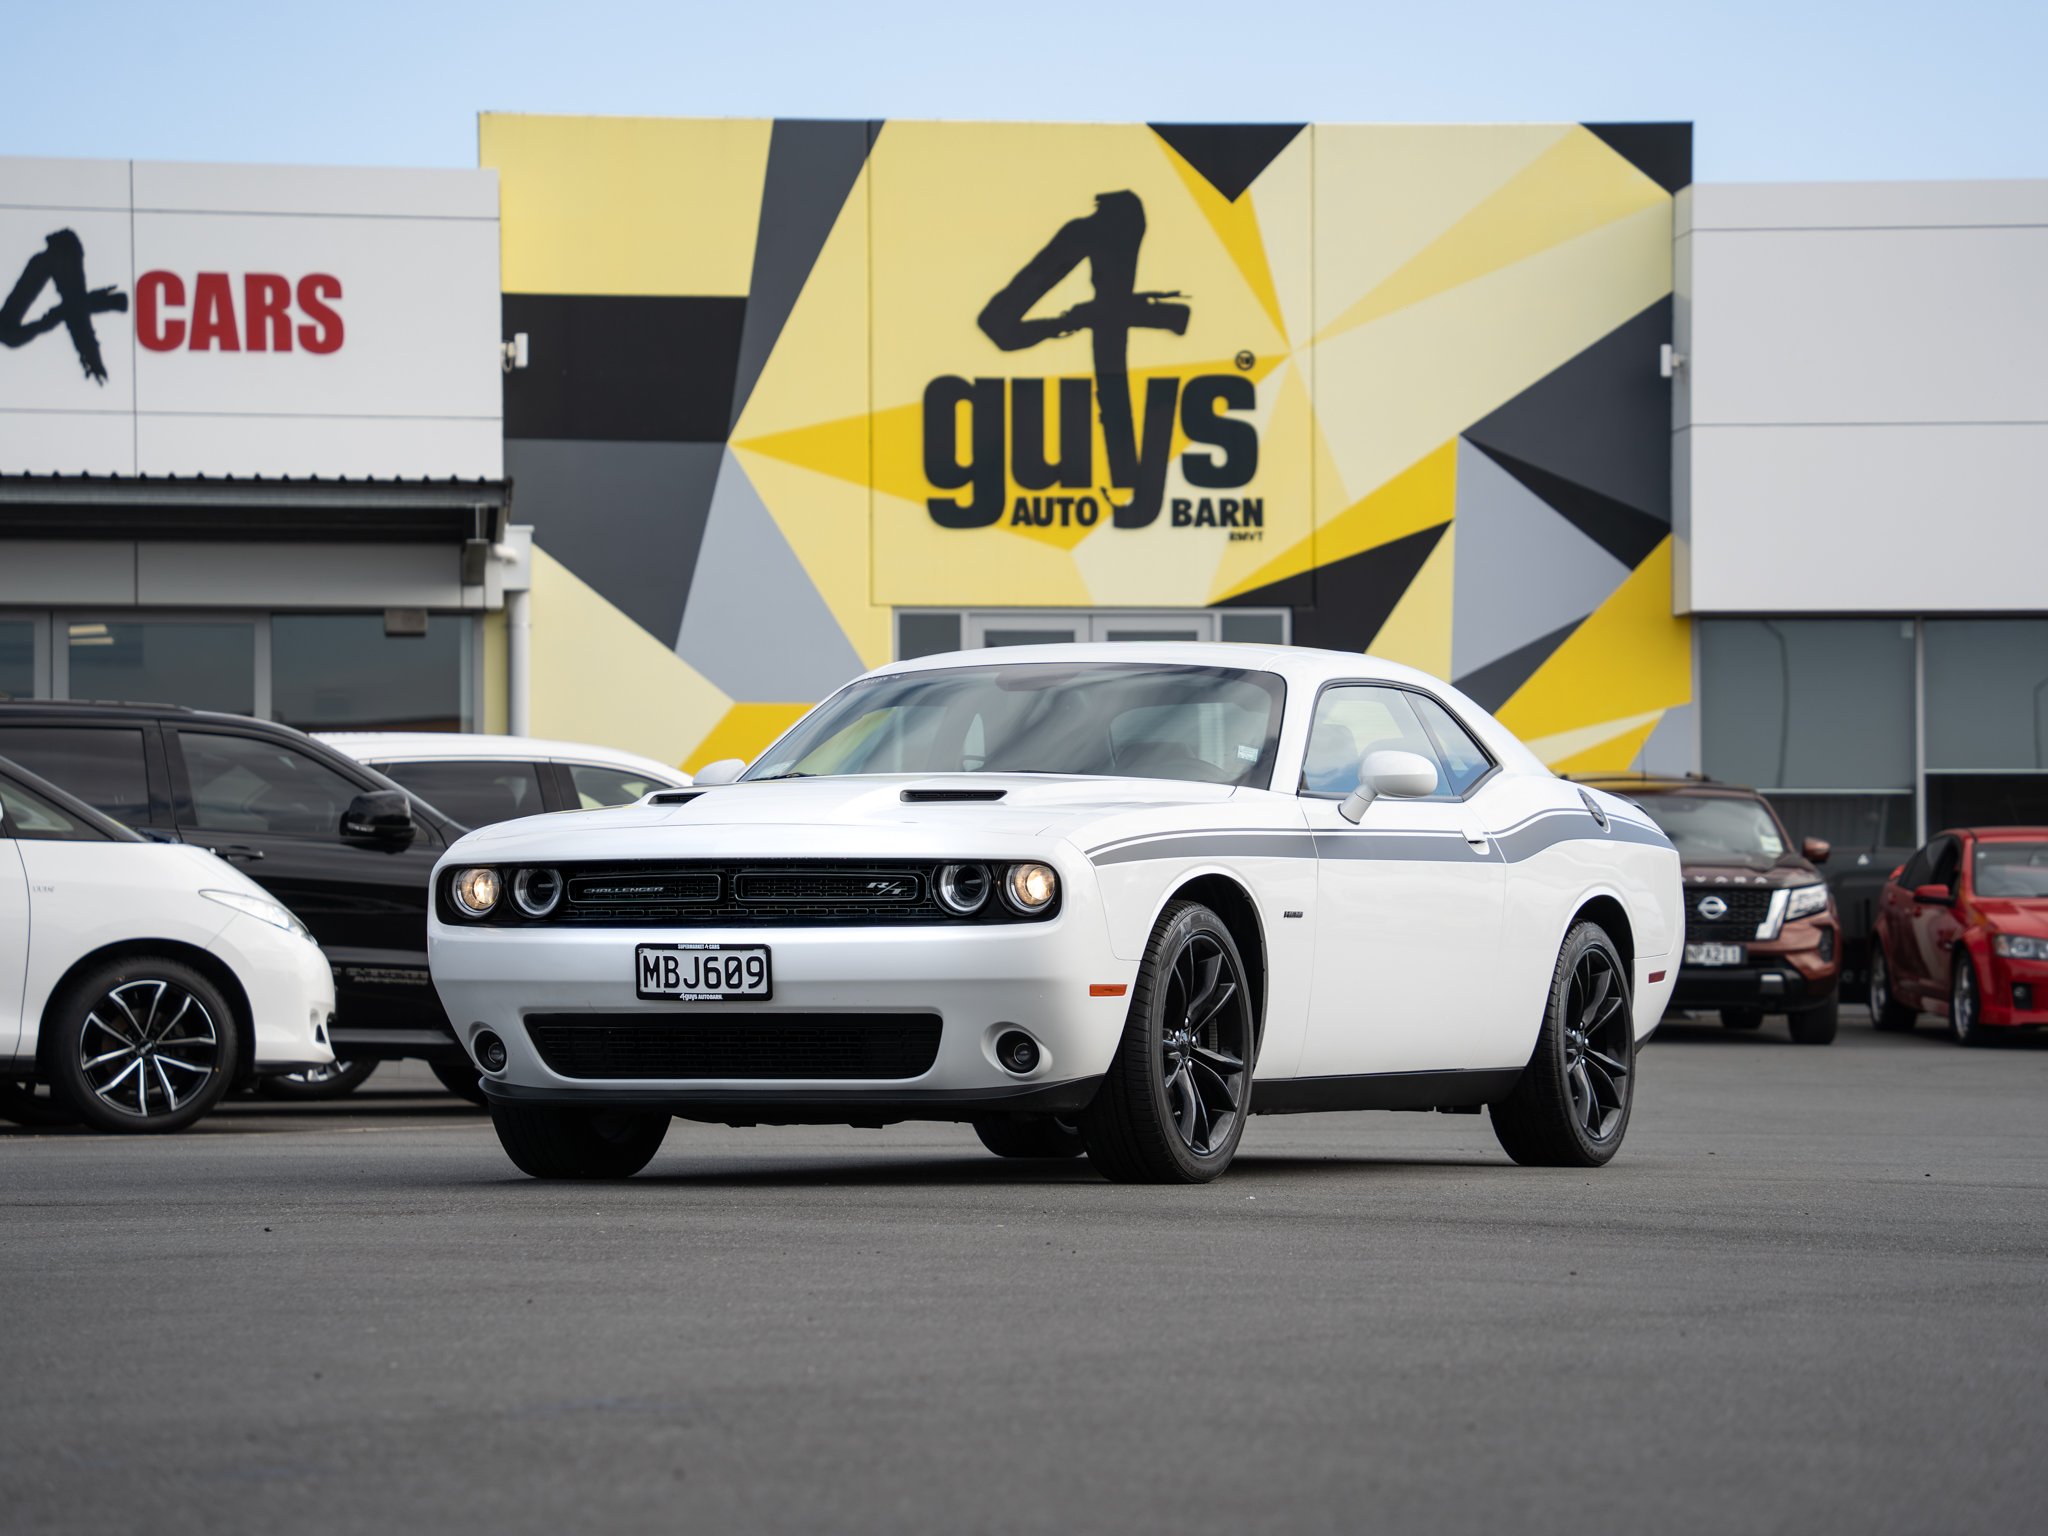 🔥 JUST ARRIVED! 🔥

2016 Dodge Challenger R/T 5.7L V8 - because who needs a therapist when you have 375 horsepower therapy sessions?&quot;

#4Guys #NewZealand #Dodge #Challenger #TherapyOnWheels